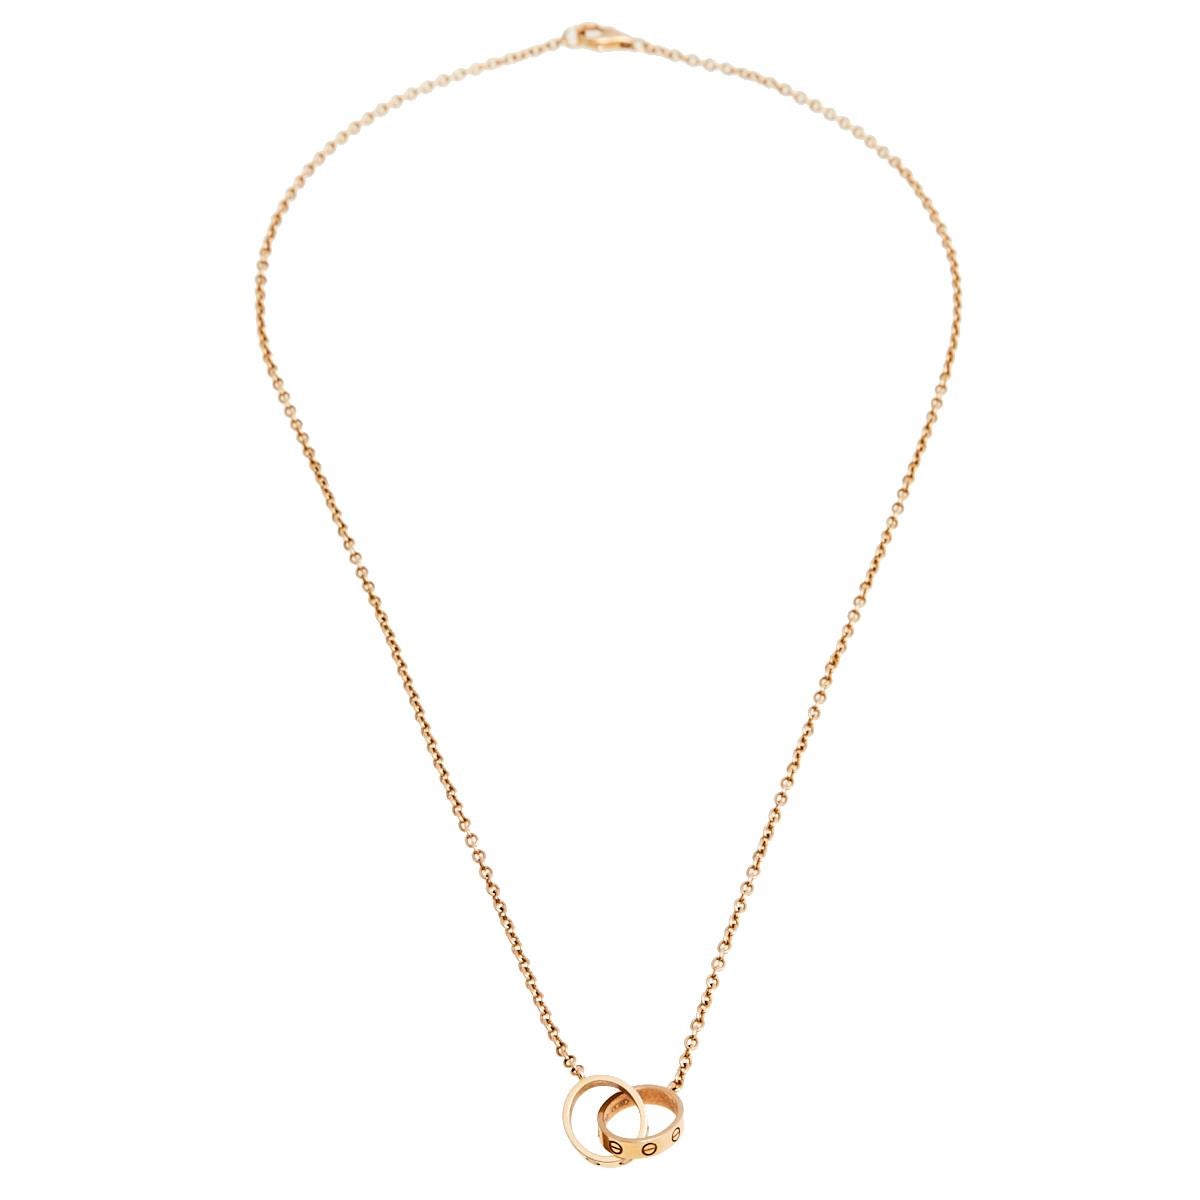 Celebrate timeless love with this necklace from Cartier's Love collection. It is made from 18k rose gold and the chain holds two magnificent hoops interlocked with one another. Both the rings carry the iconic screw motifs which are a signature of